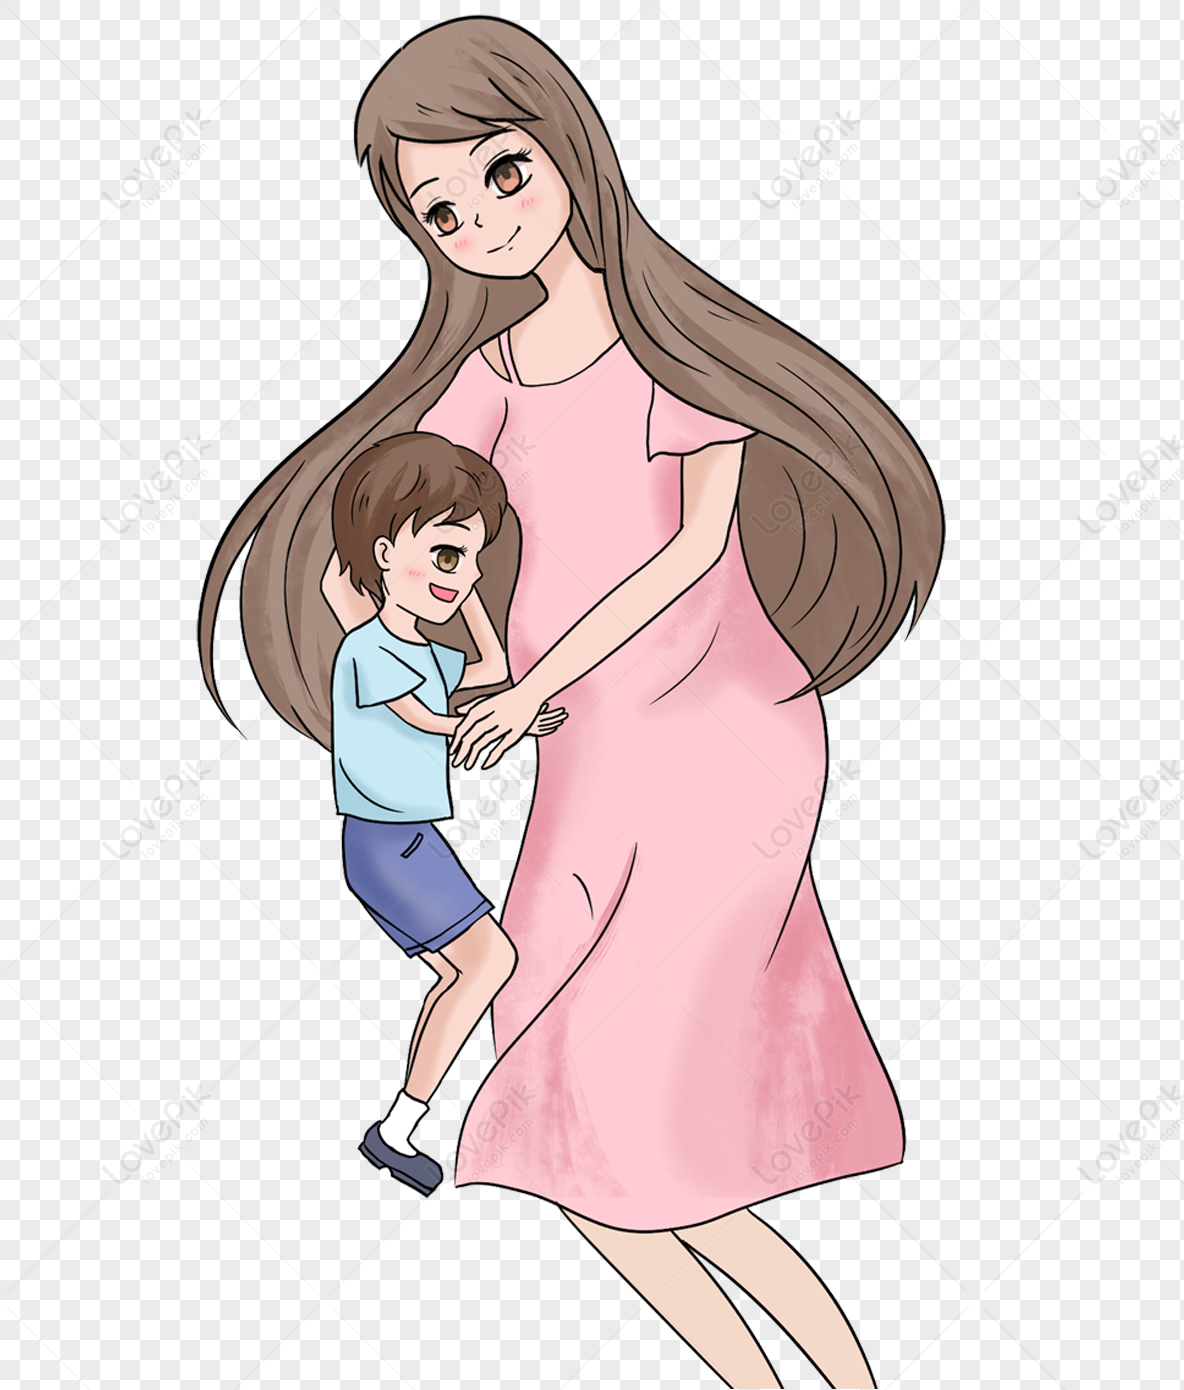 Mother And Son Free PNG And Clipart Image For Free Download - Lovepik |  400223309